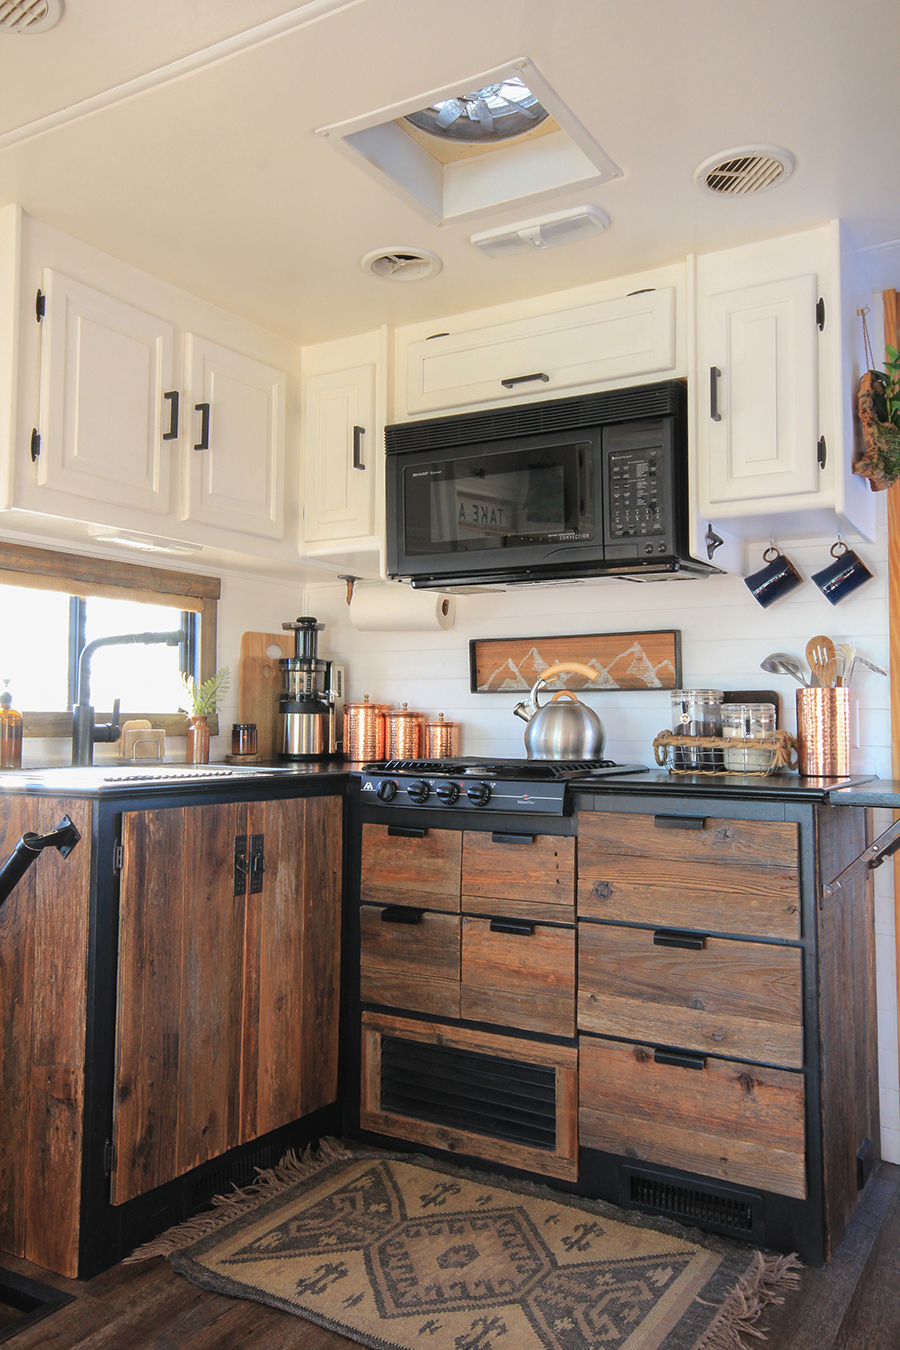 Reclaimed Wood Kitchen Cabinets inside RV | MountainModernLife.com